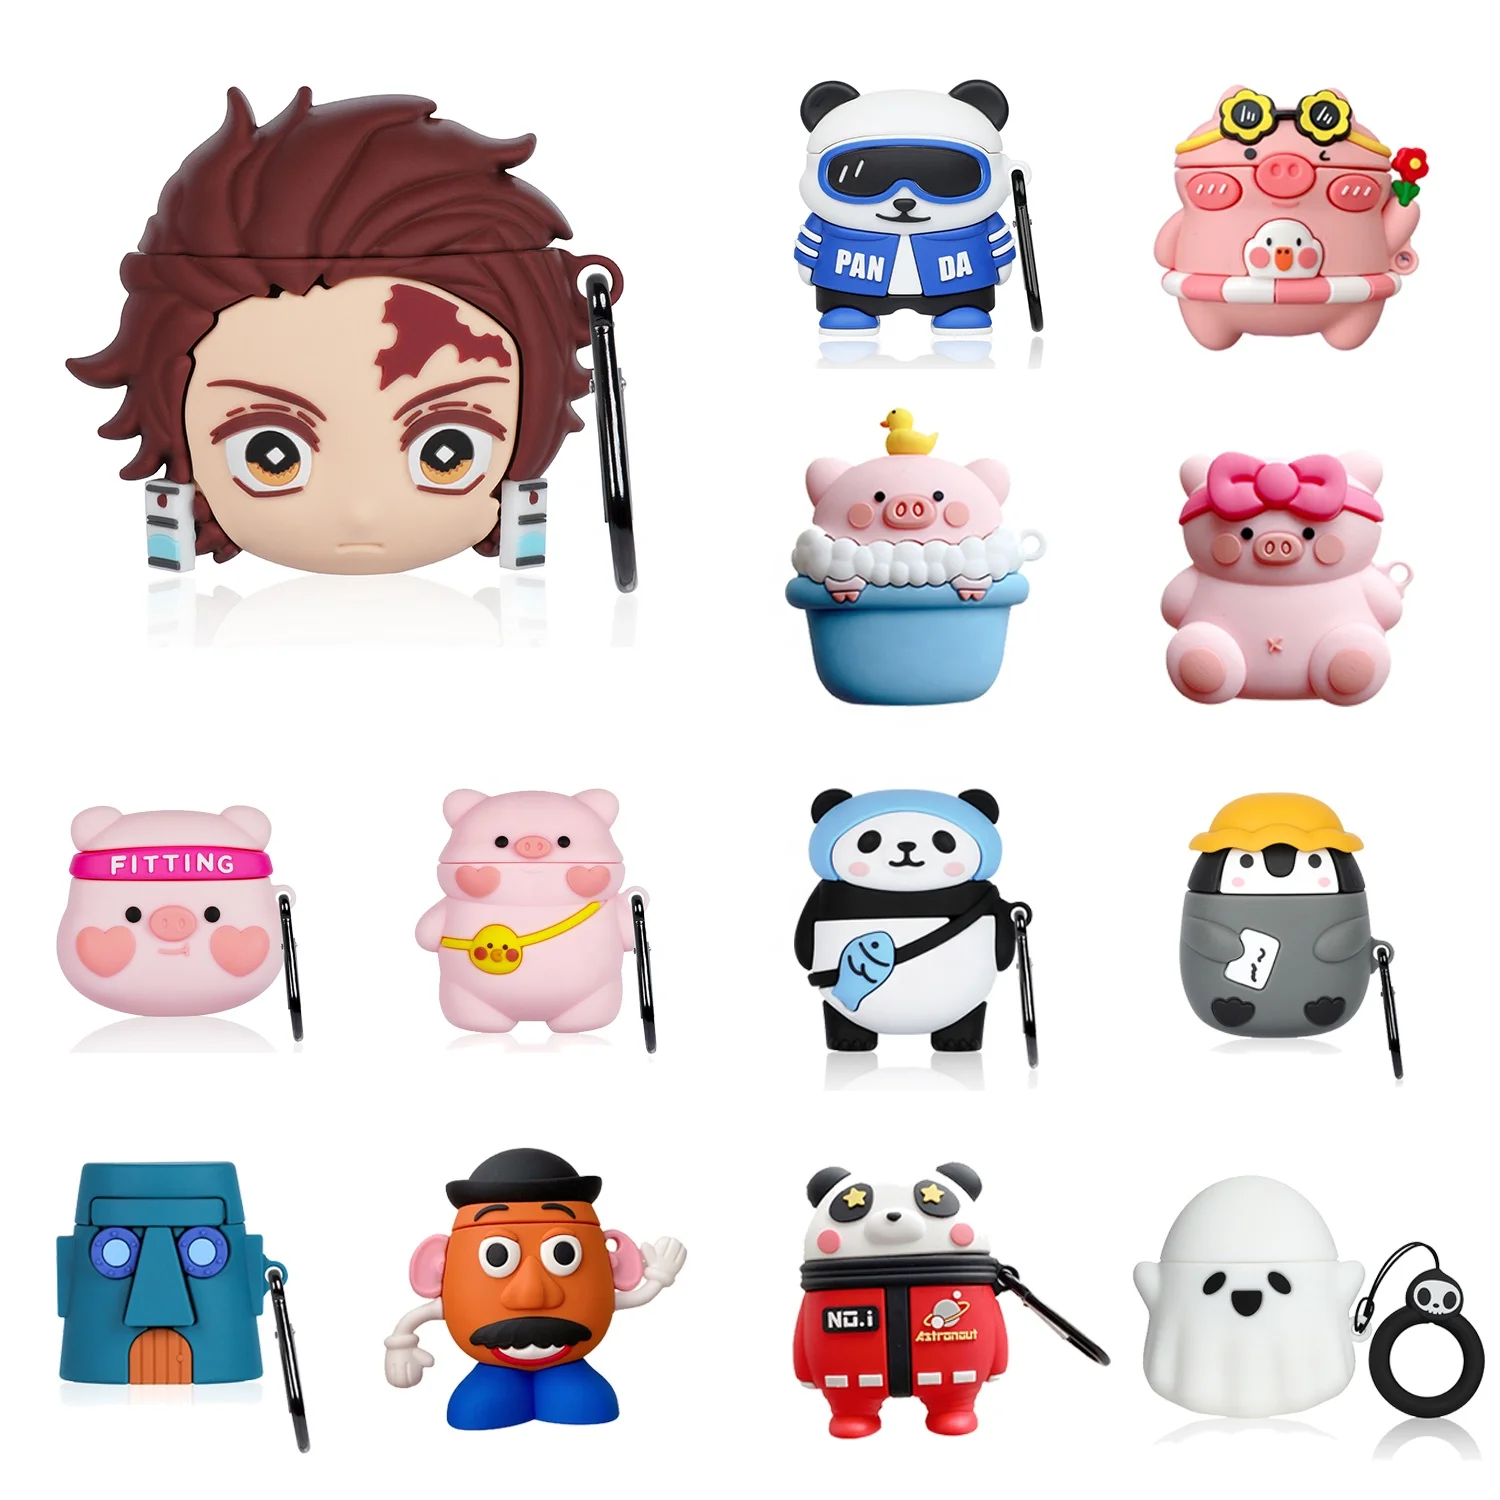 

Hot Sale Cute Cartoon Silicon Air Pods 2 Case 3D Favorite Character Design for Airpods Case Cover Earphone Earpods Case, Multiple colors